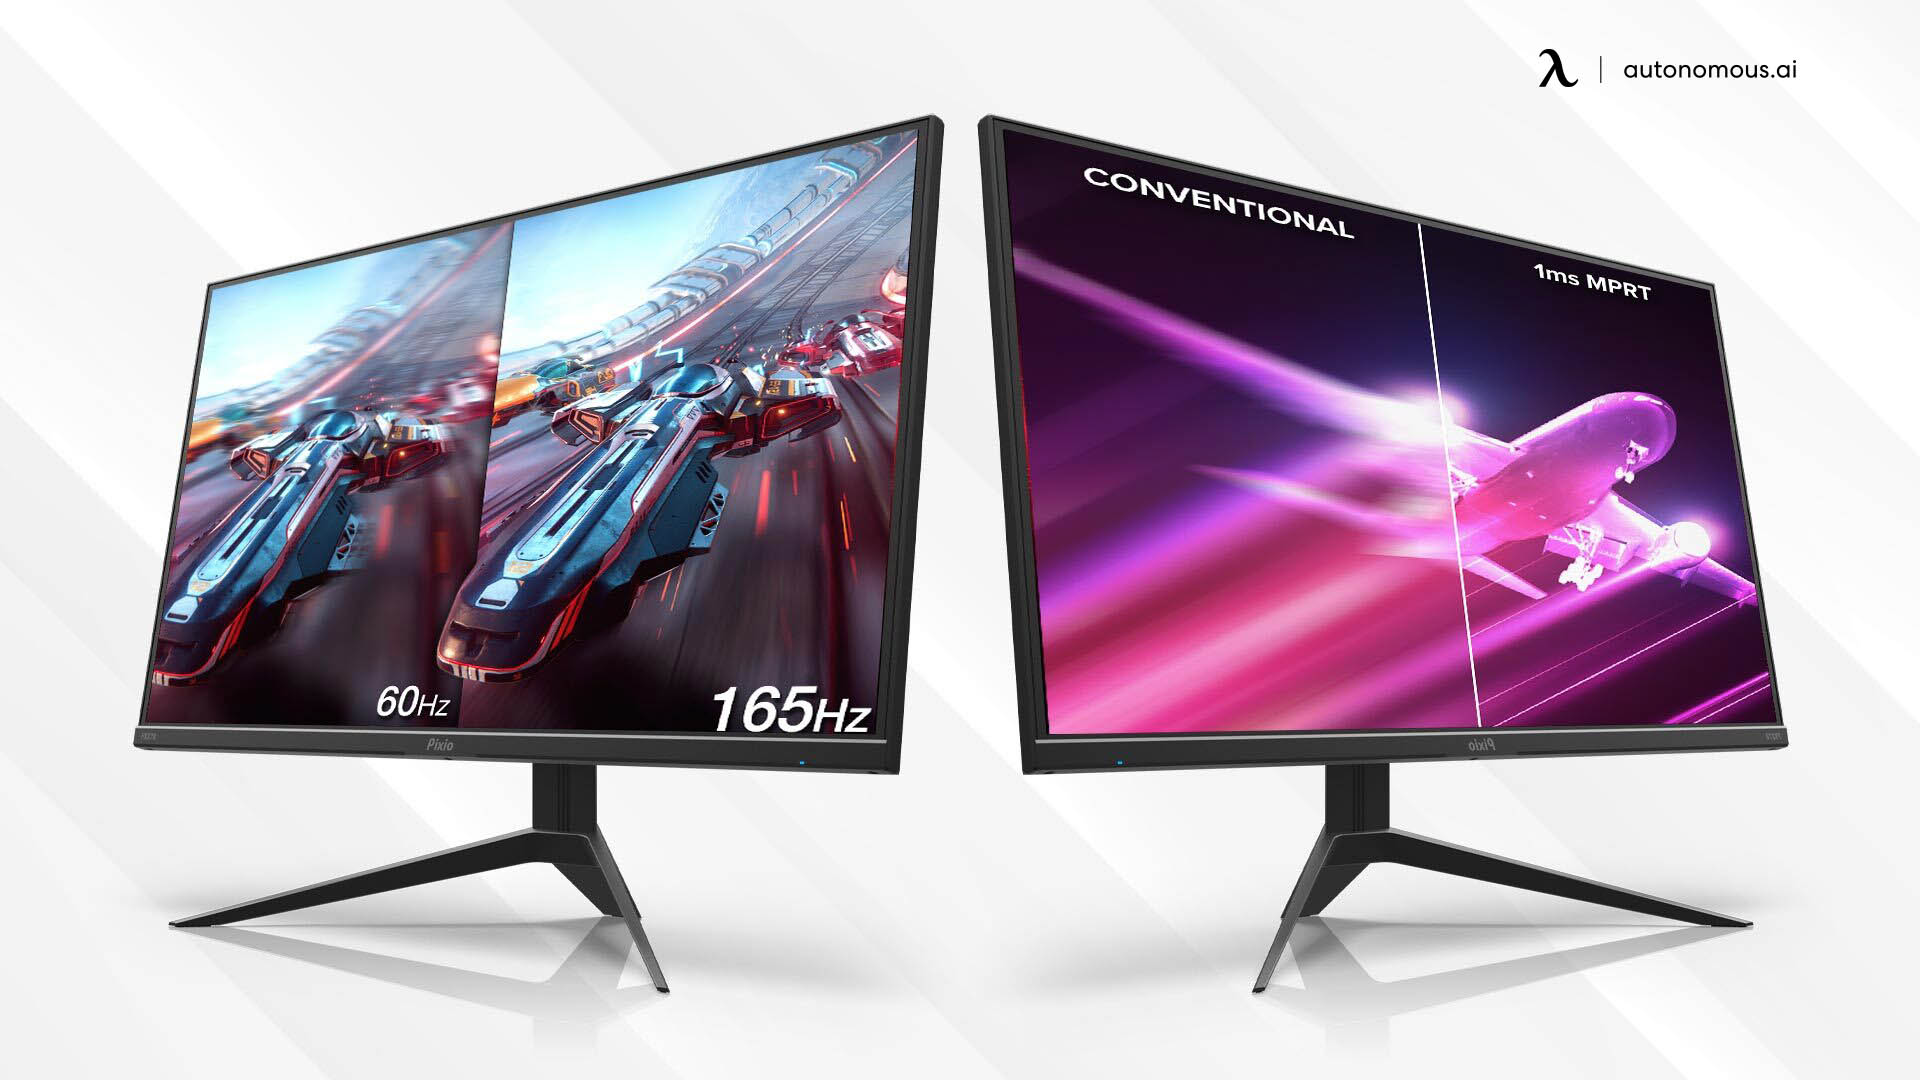 PX277 Prime 27-inch gaming monitor